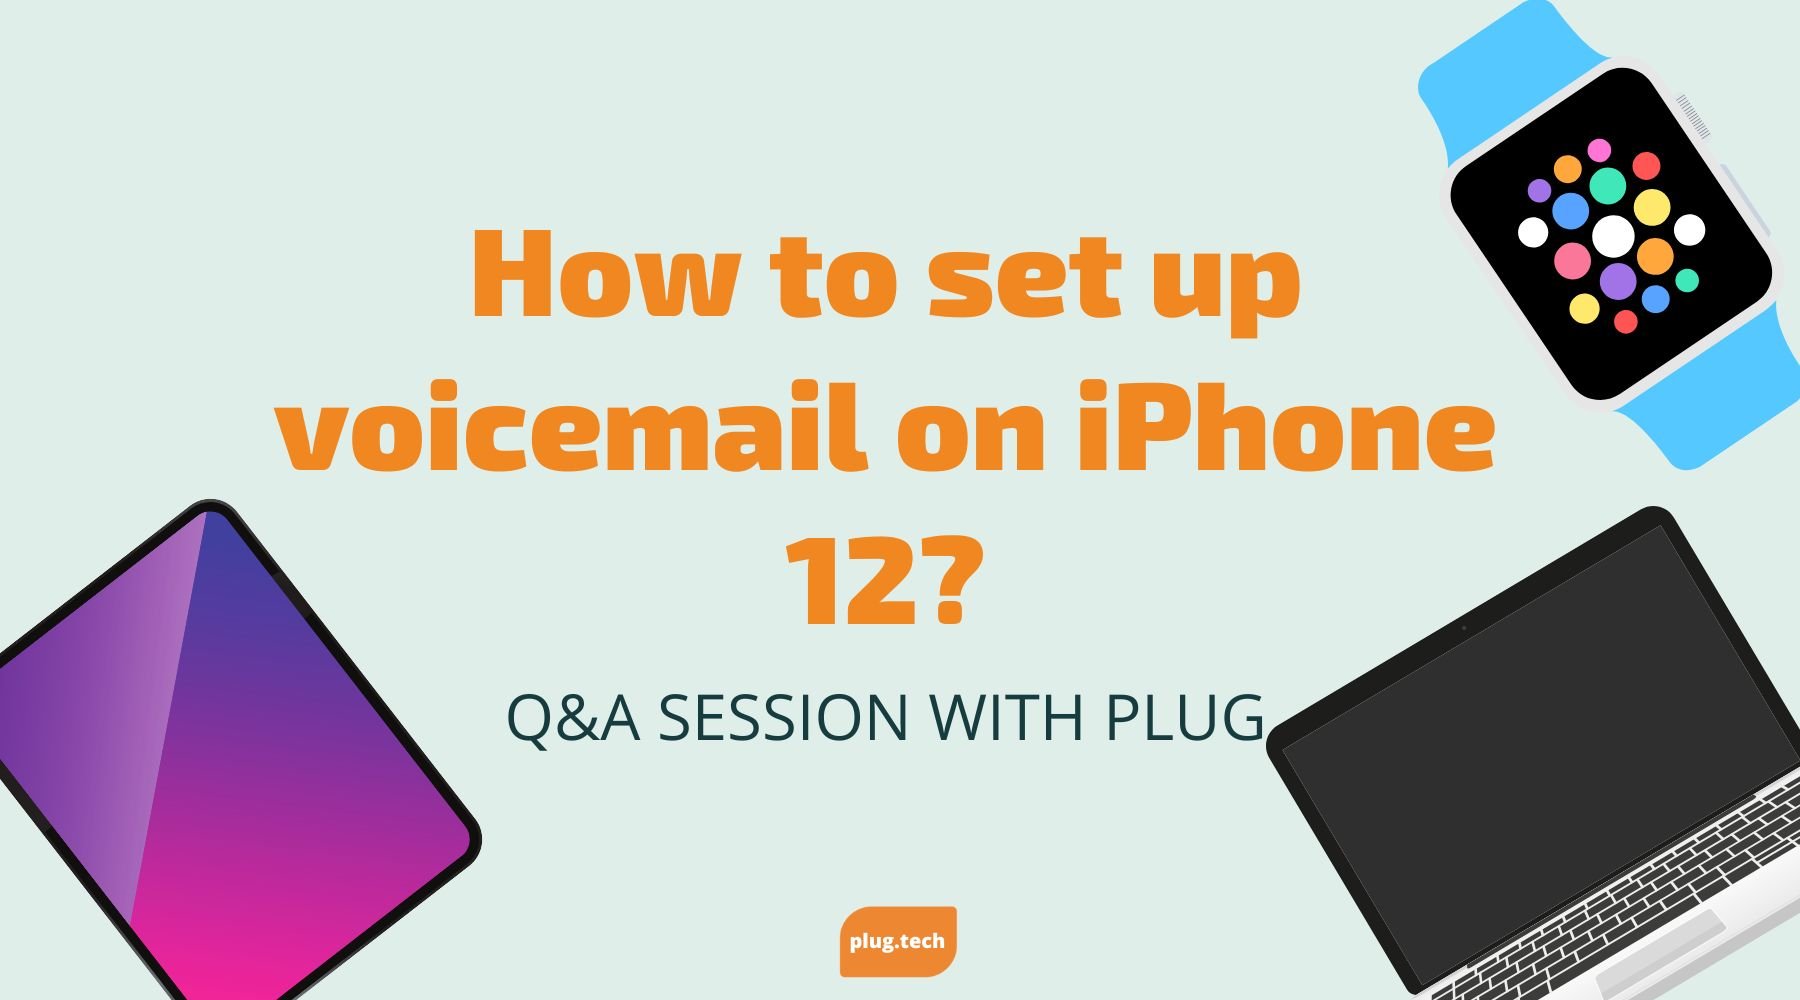 How to set up voicemail on iPhone 12?